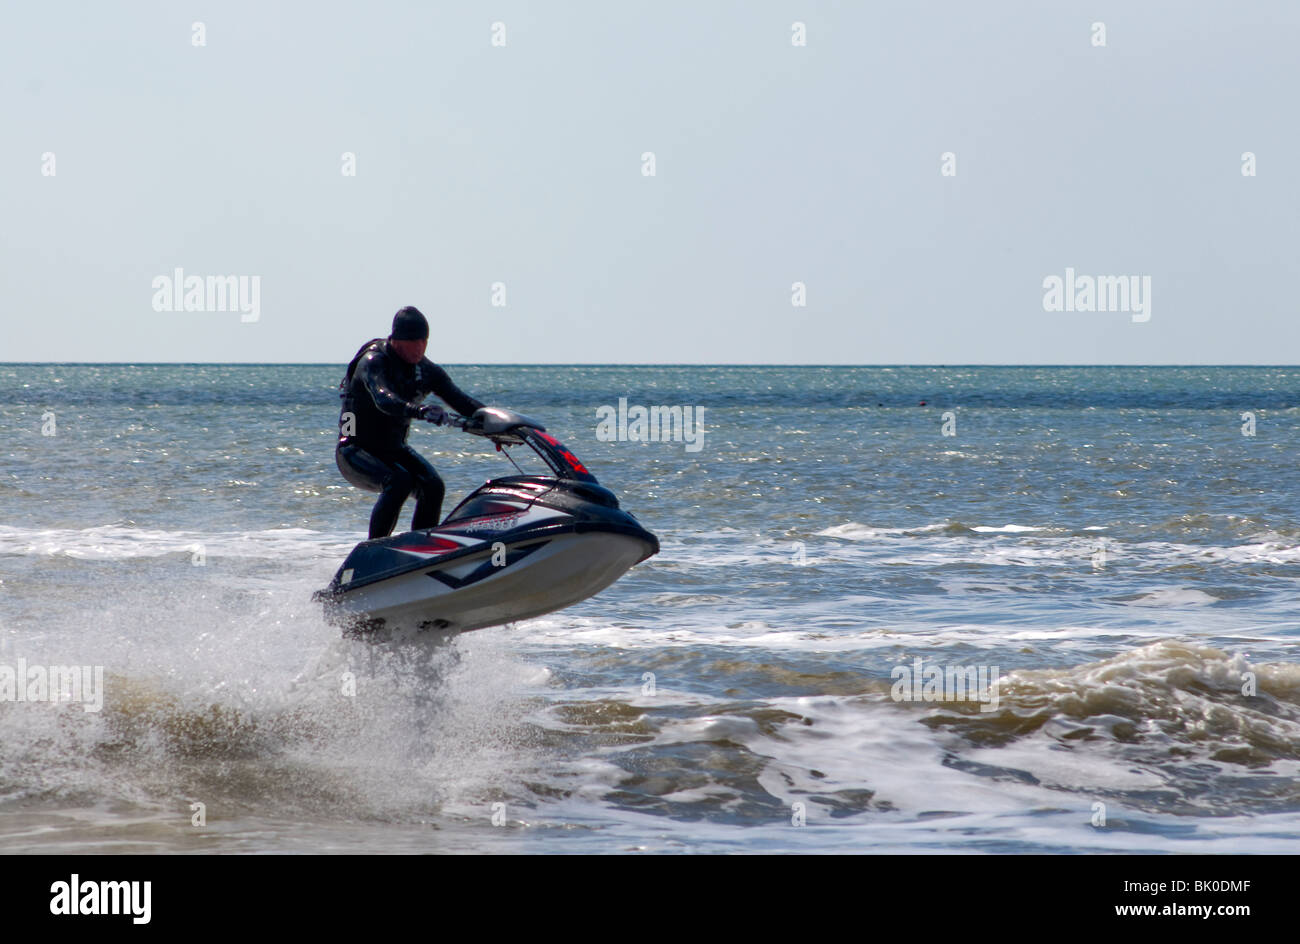 Jet skiing off the beach in Bournemouth, jumping the surf and having fun. Stock Photo